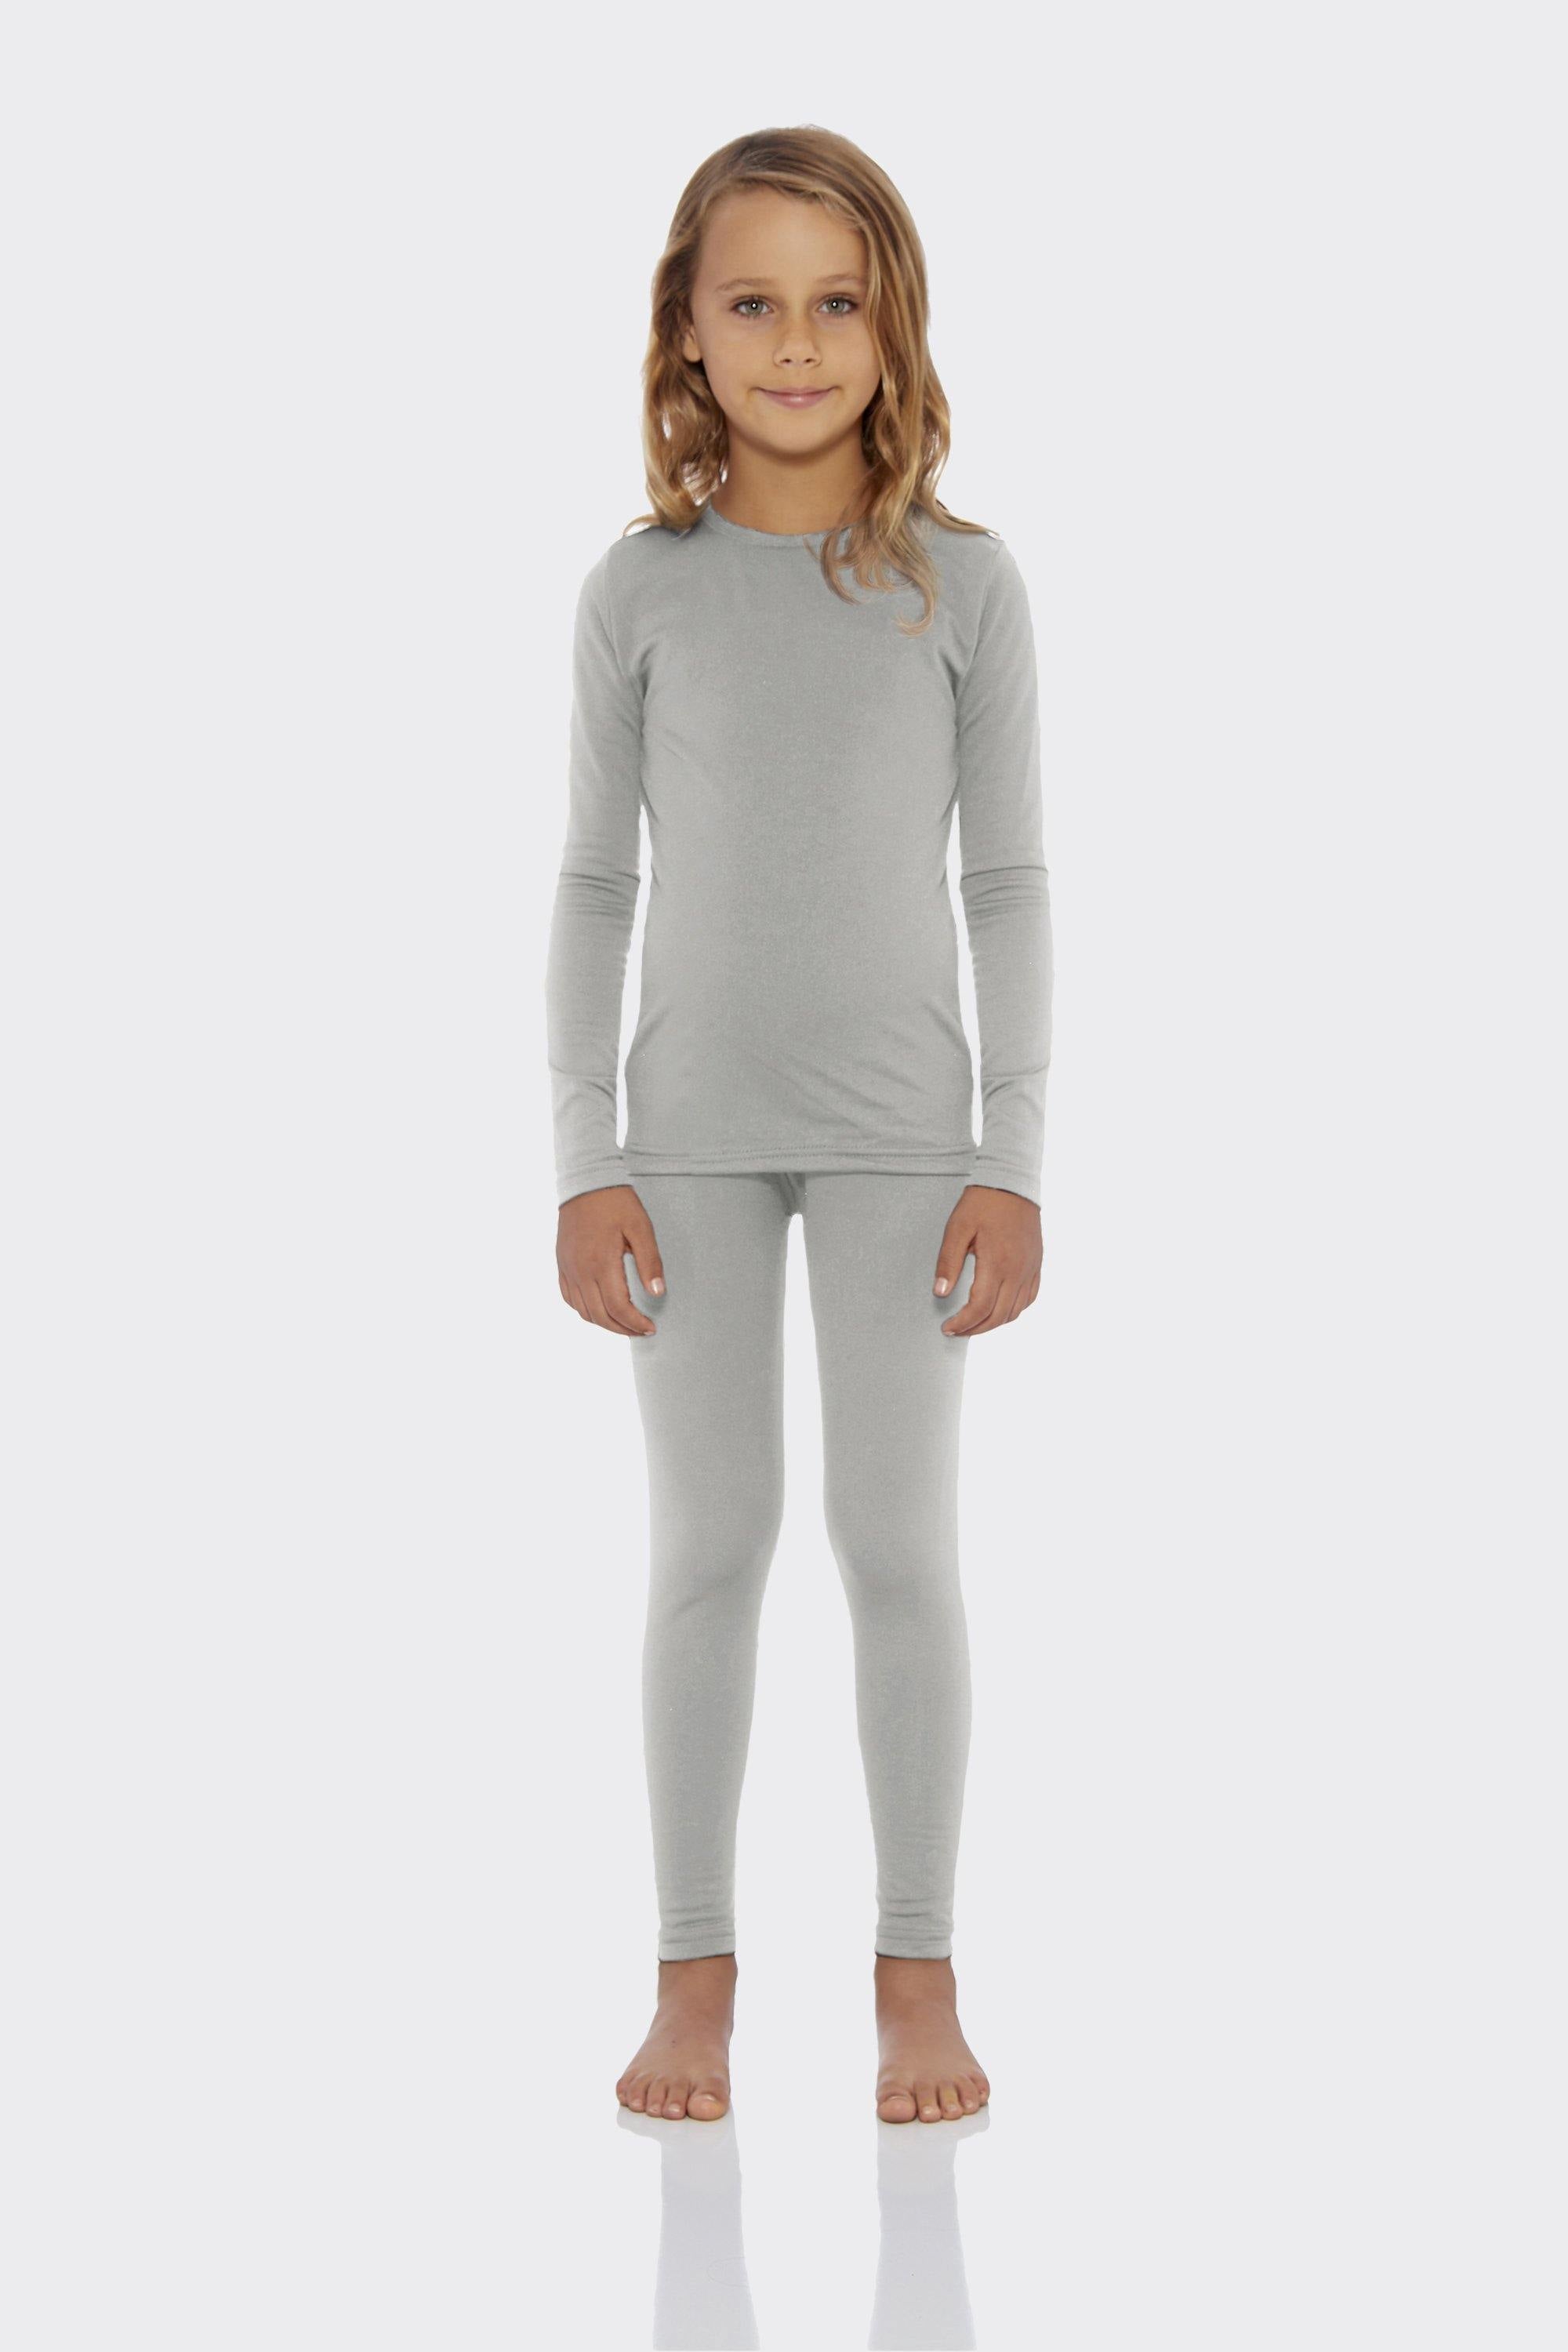 Rocky Thermal Underwear for Women, Heavyweight and Midweight (Thermal Long  Johns